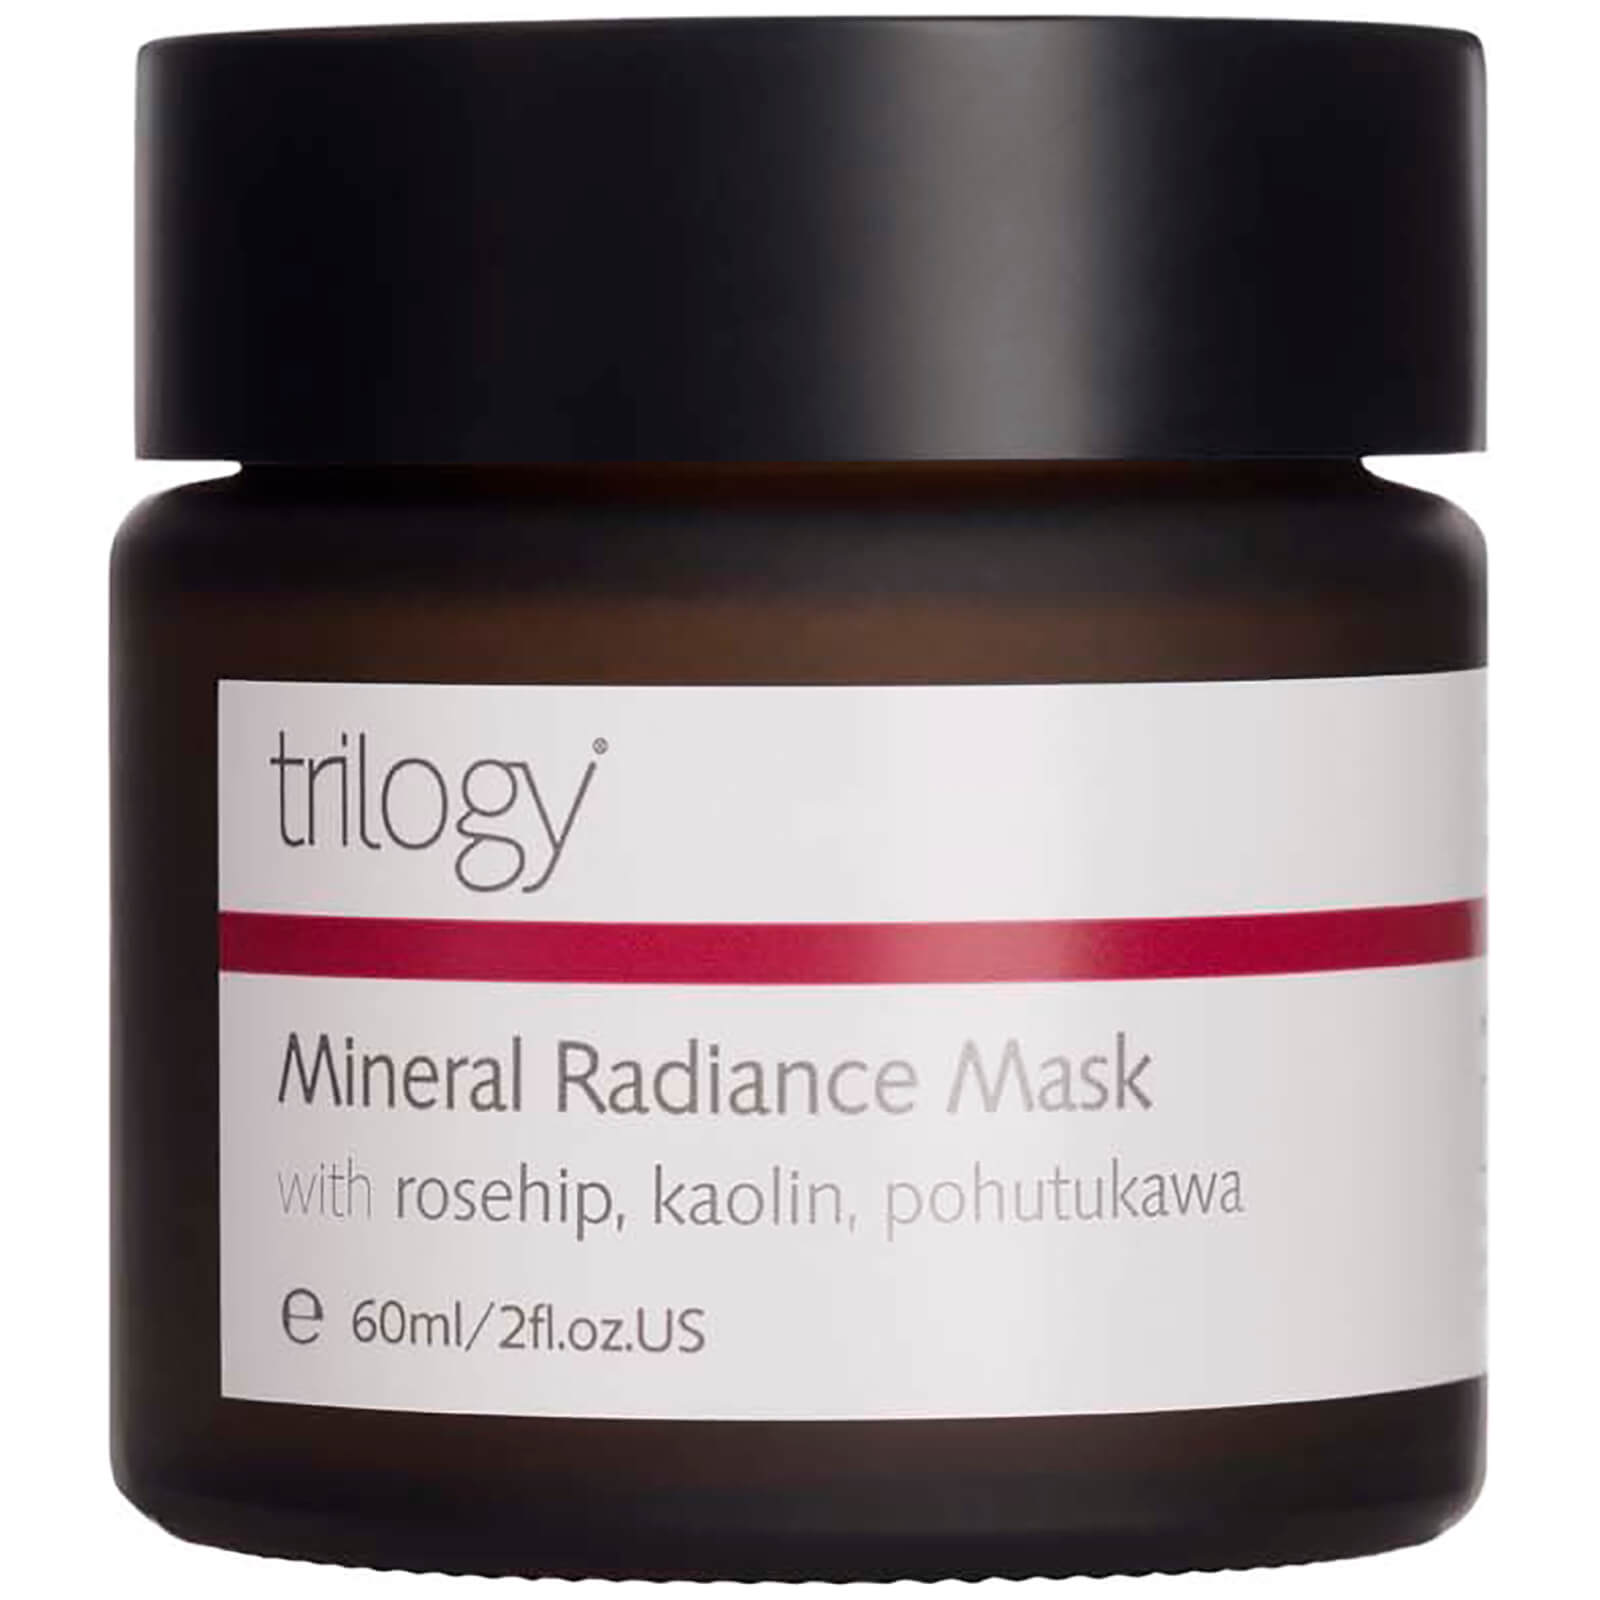 Trilogy Mineral Radiance Mask 2 oz In White